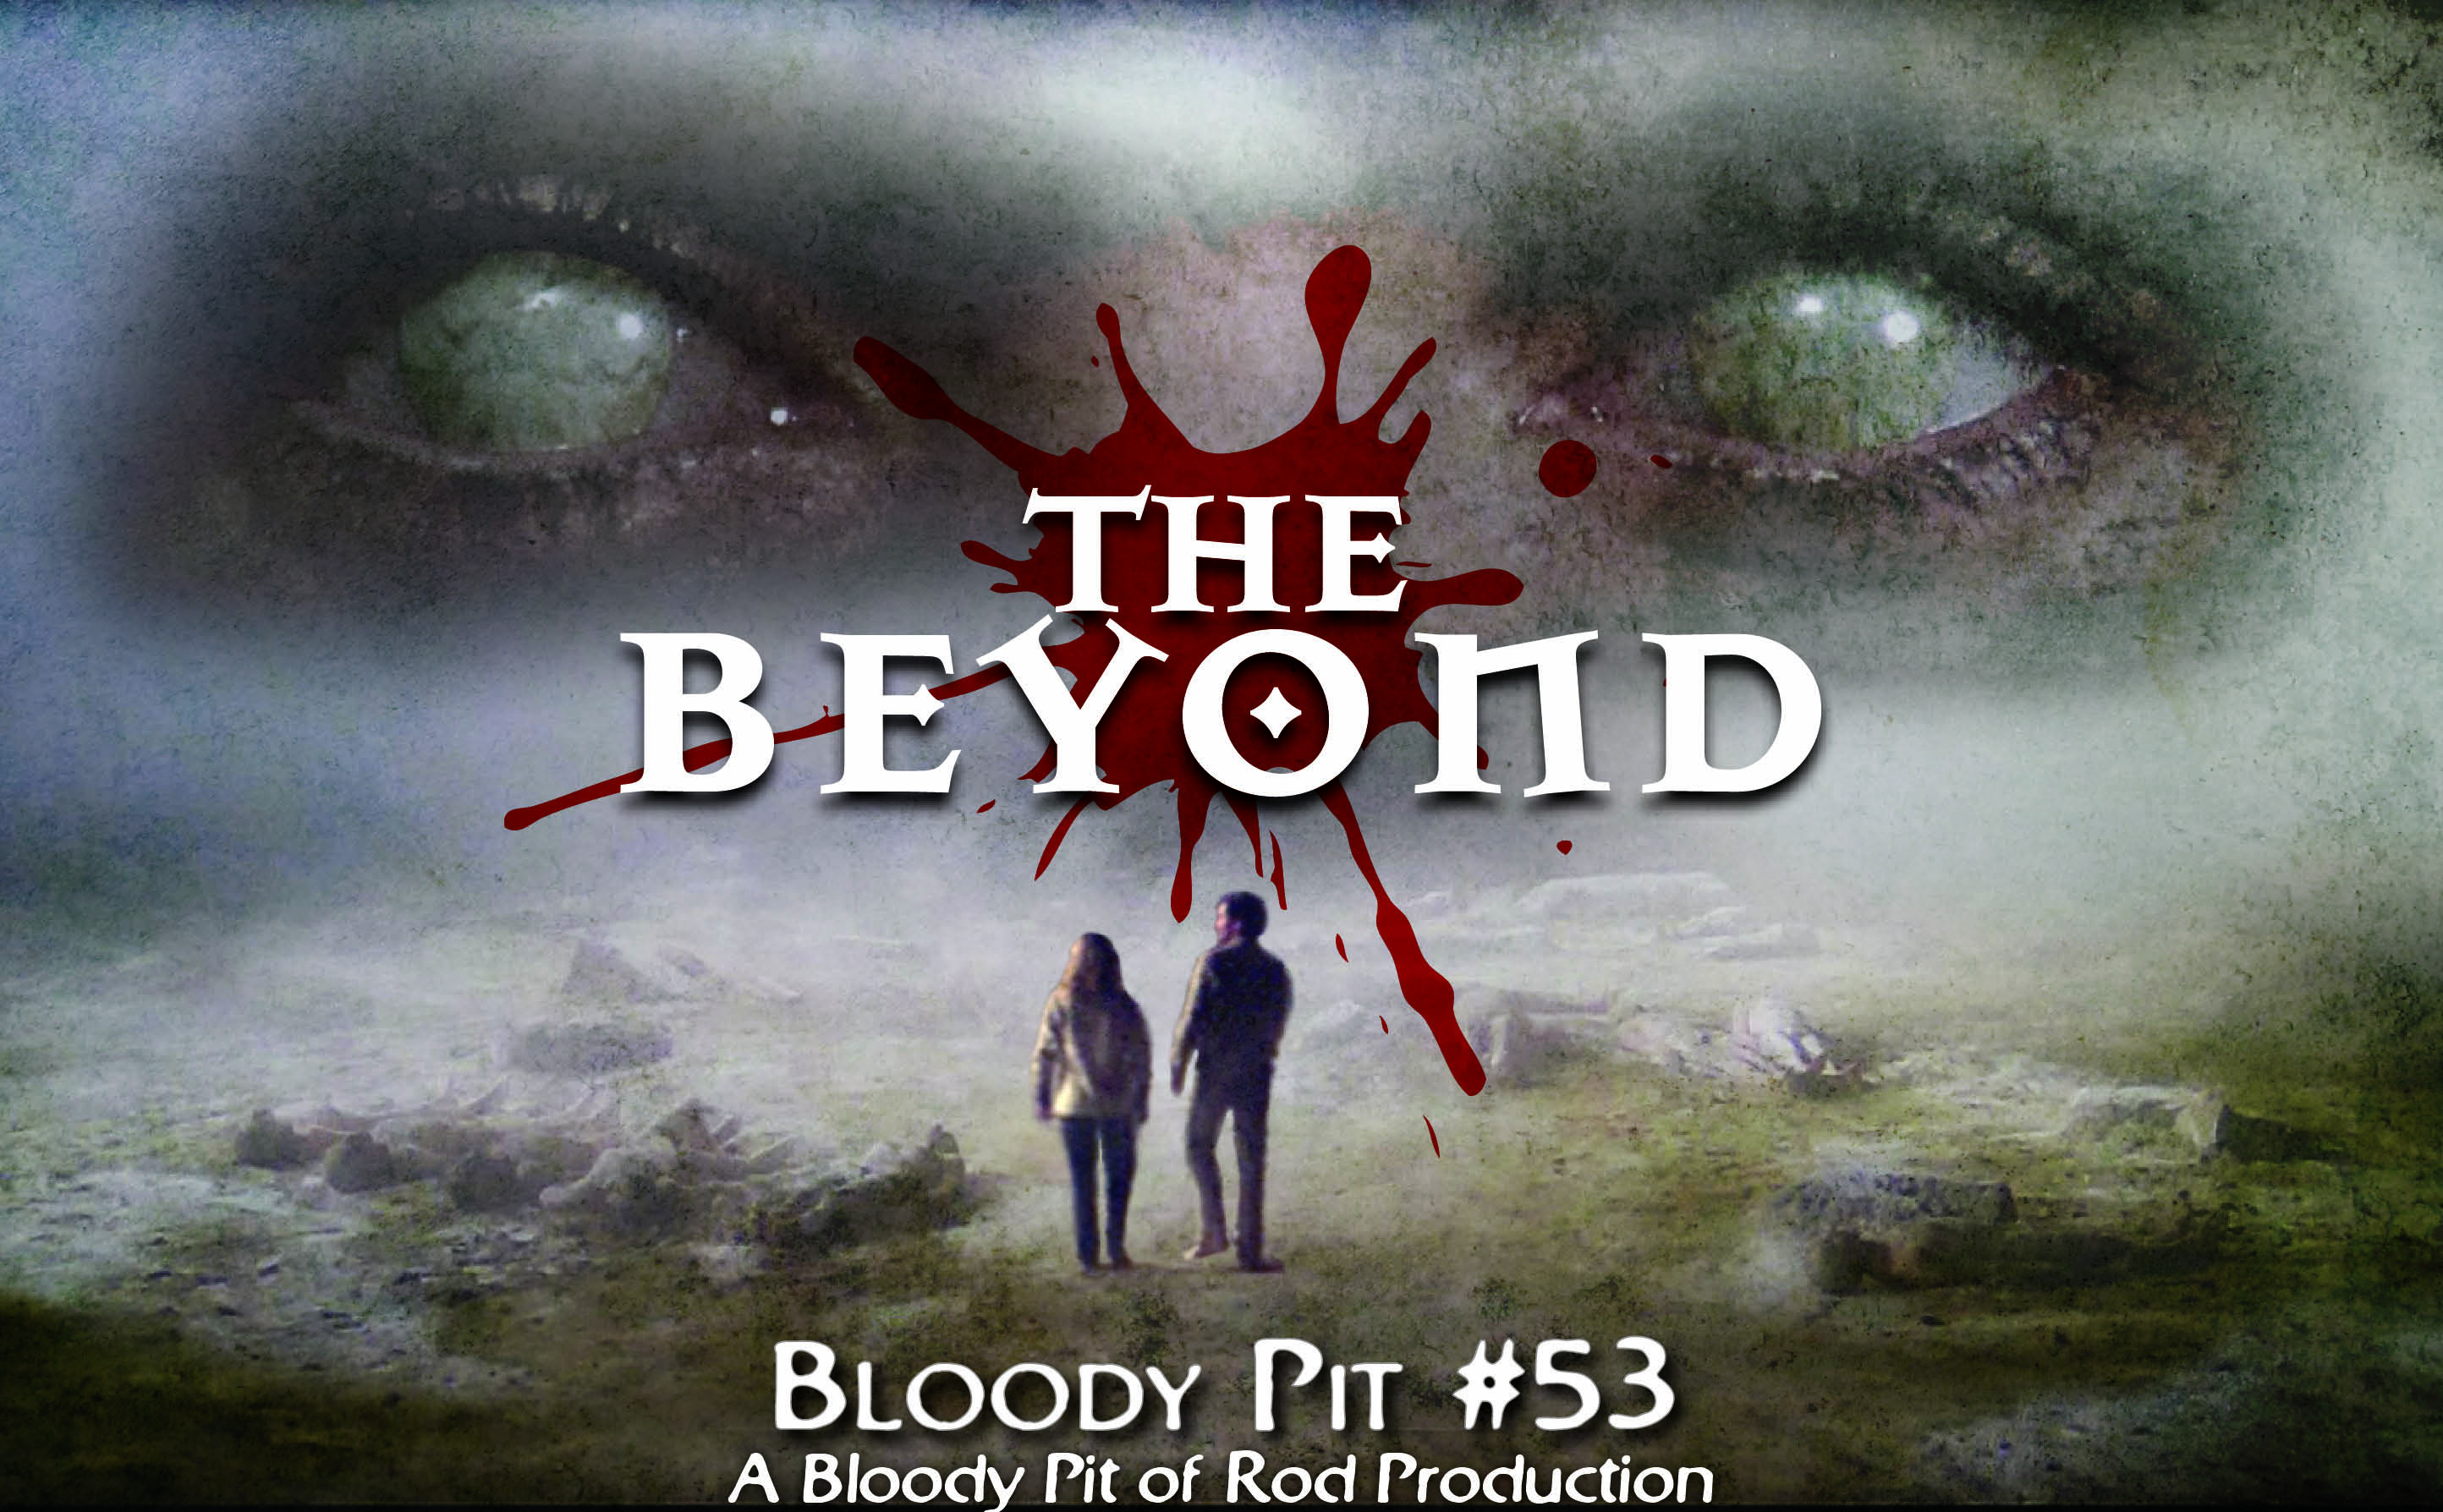 The Bloody Pit #53 - THE BEYOND (1981) 